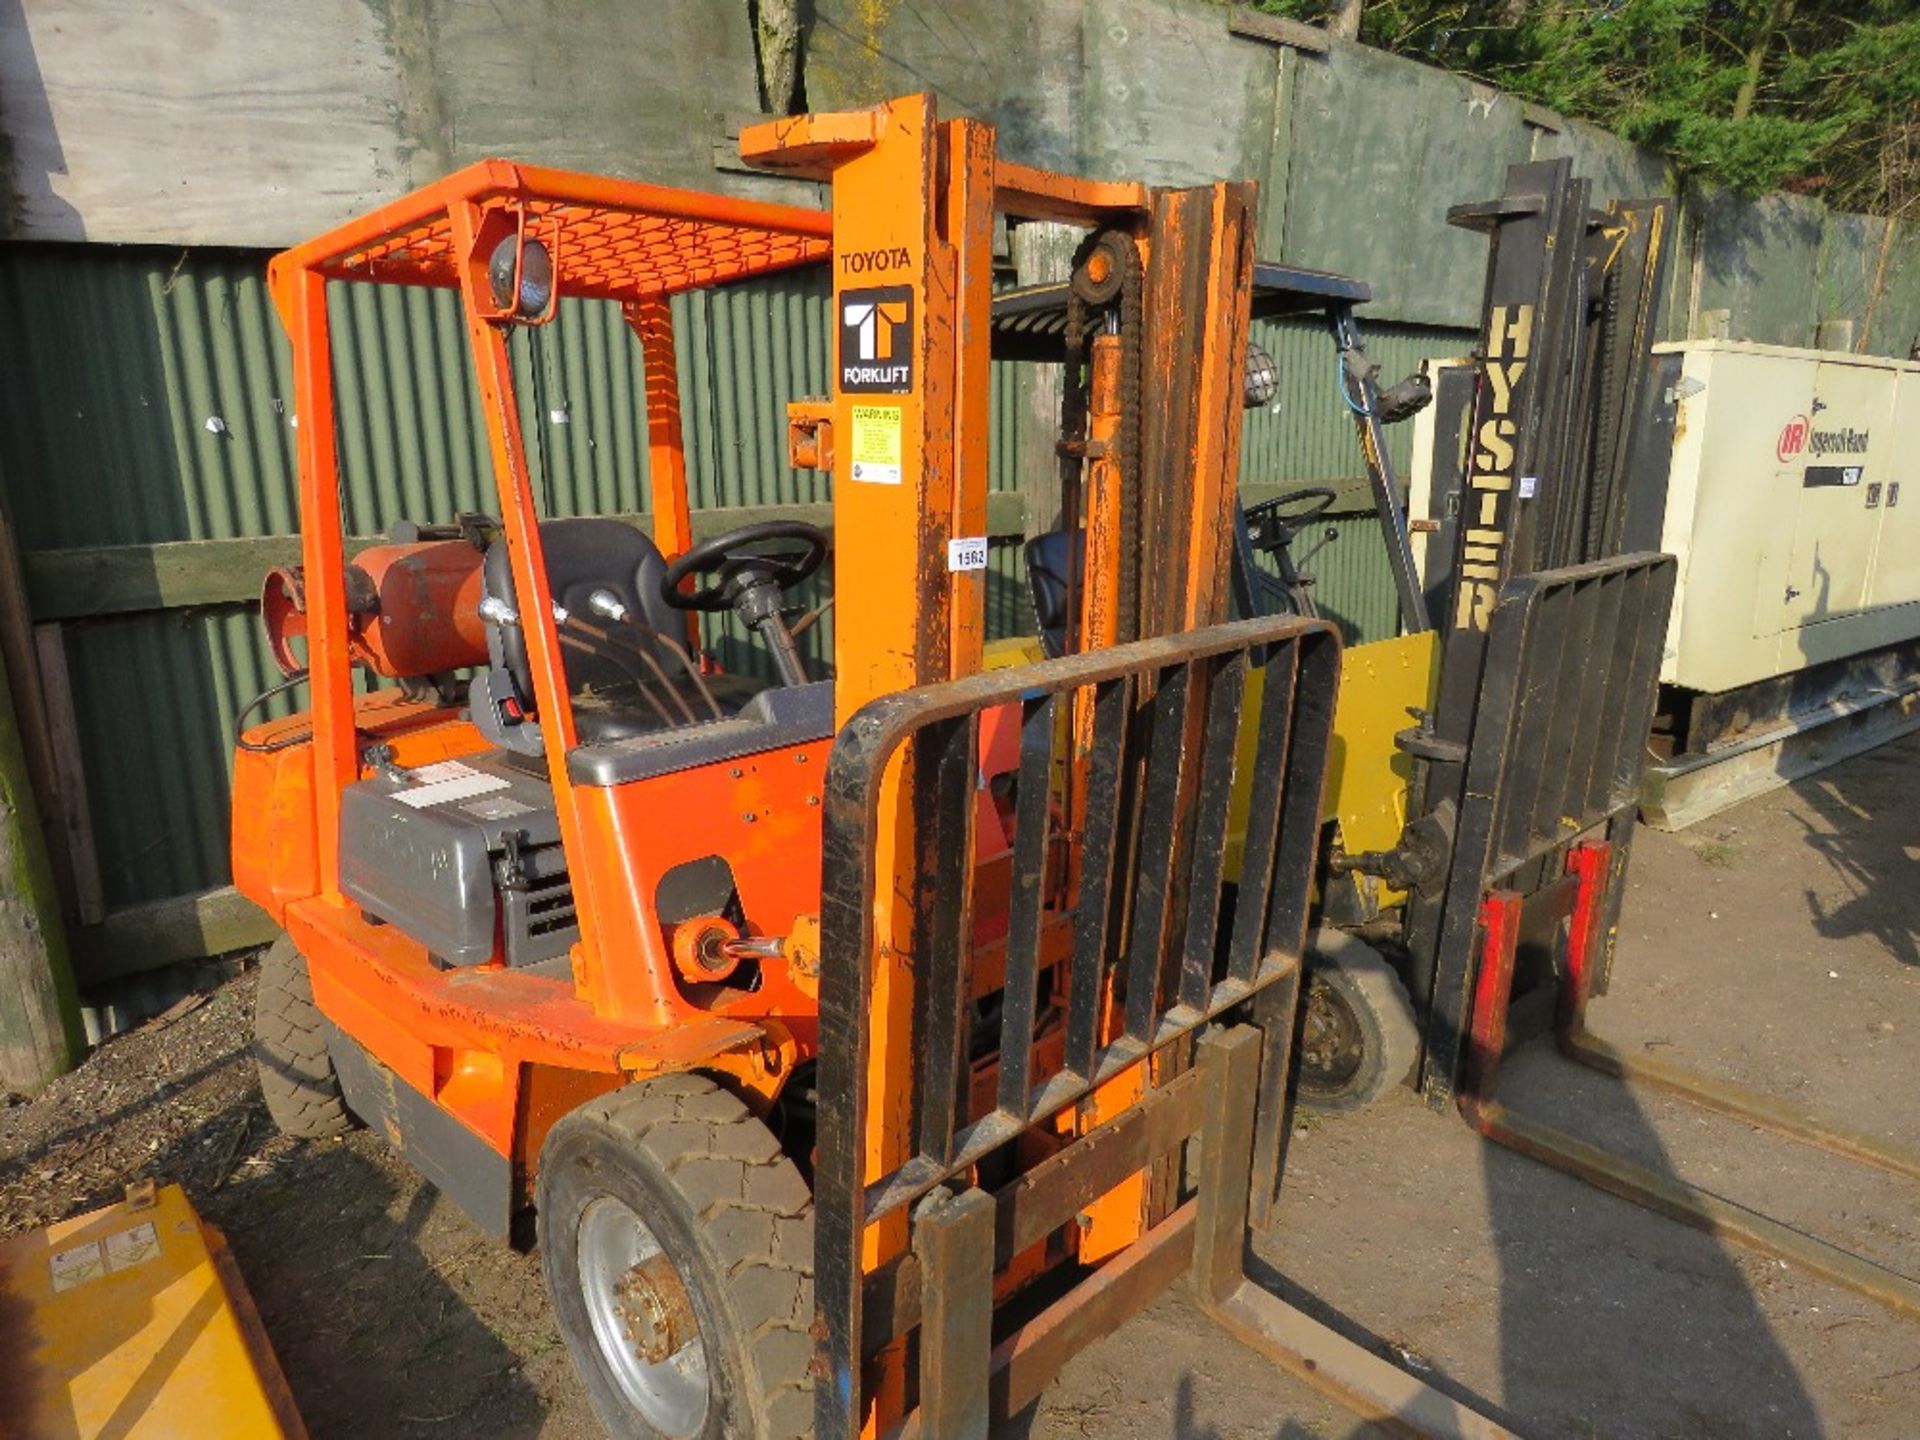 TOYOTA 2.8TONNE GAS FORKLIFT. 3M LIFT HEIGHT.